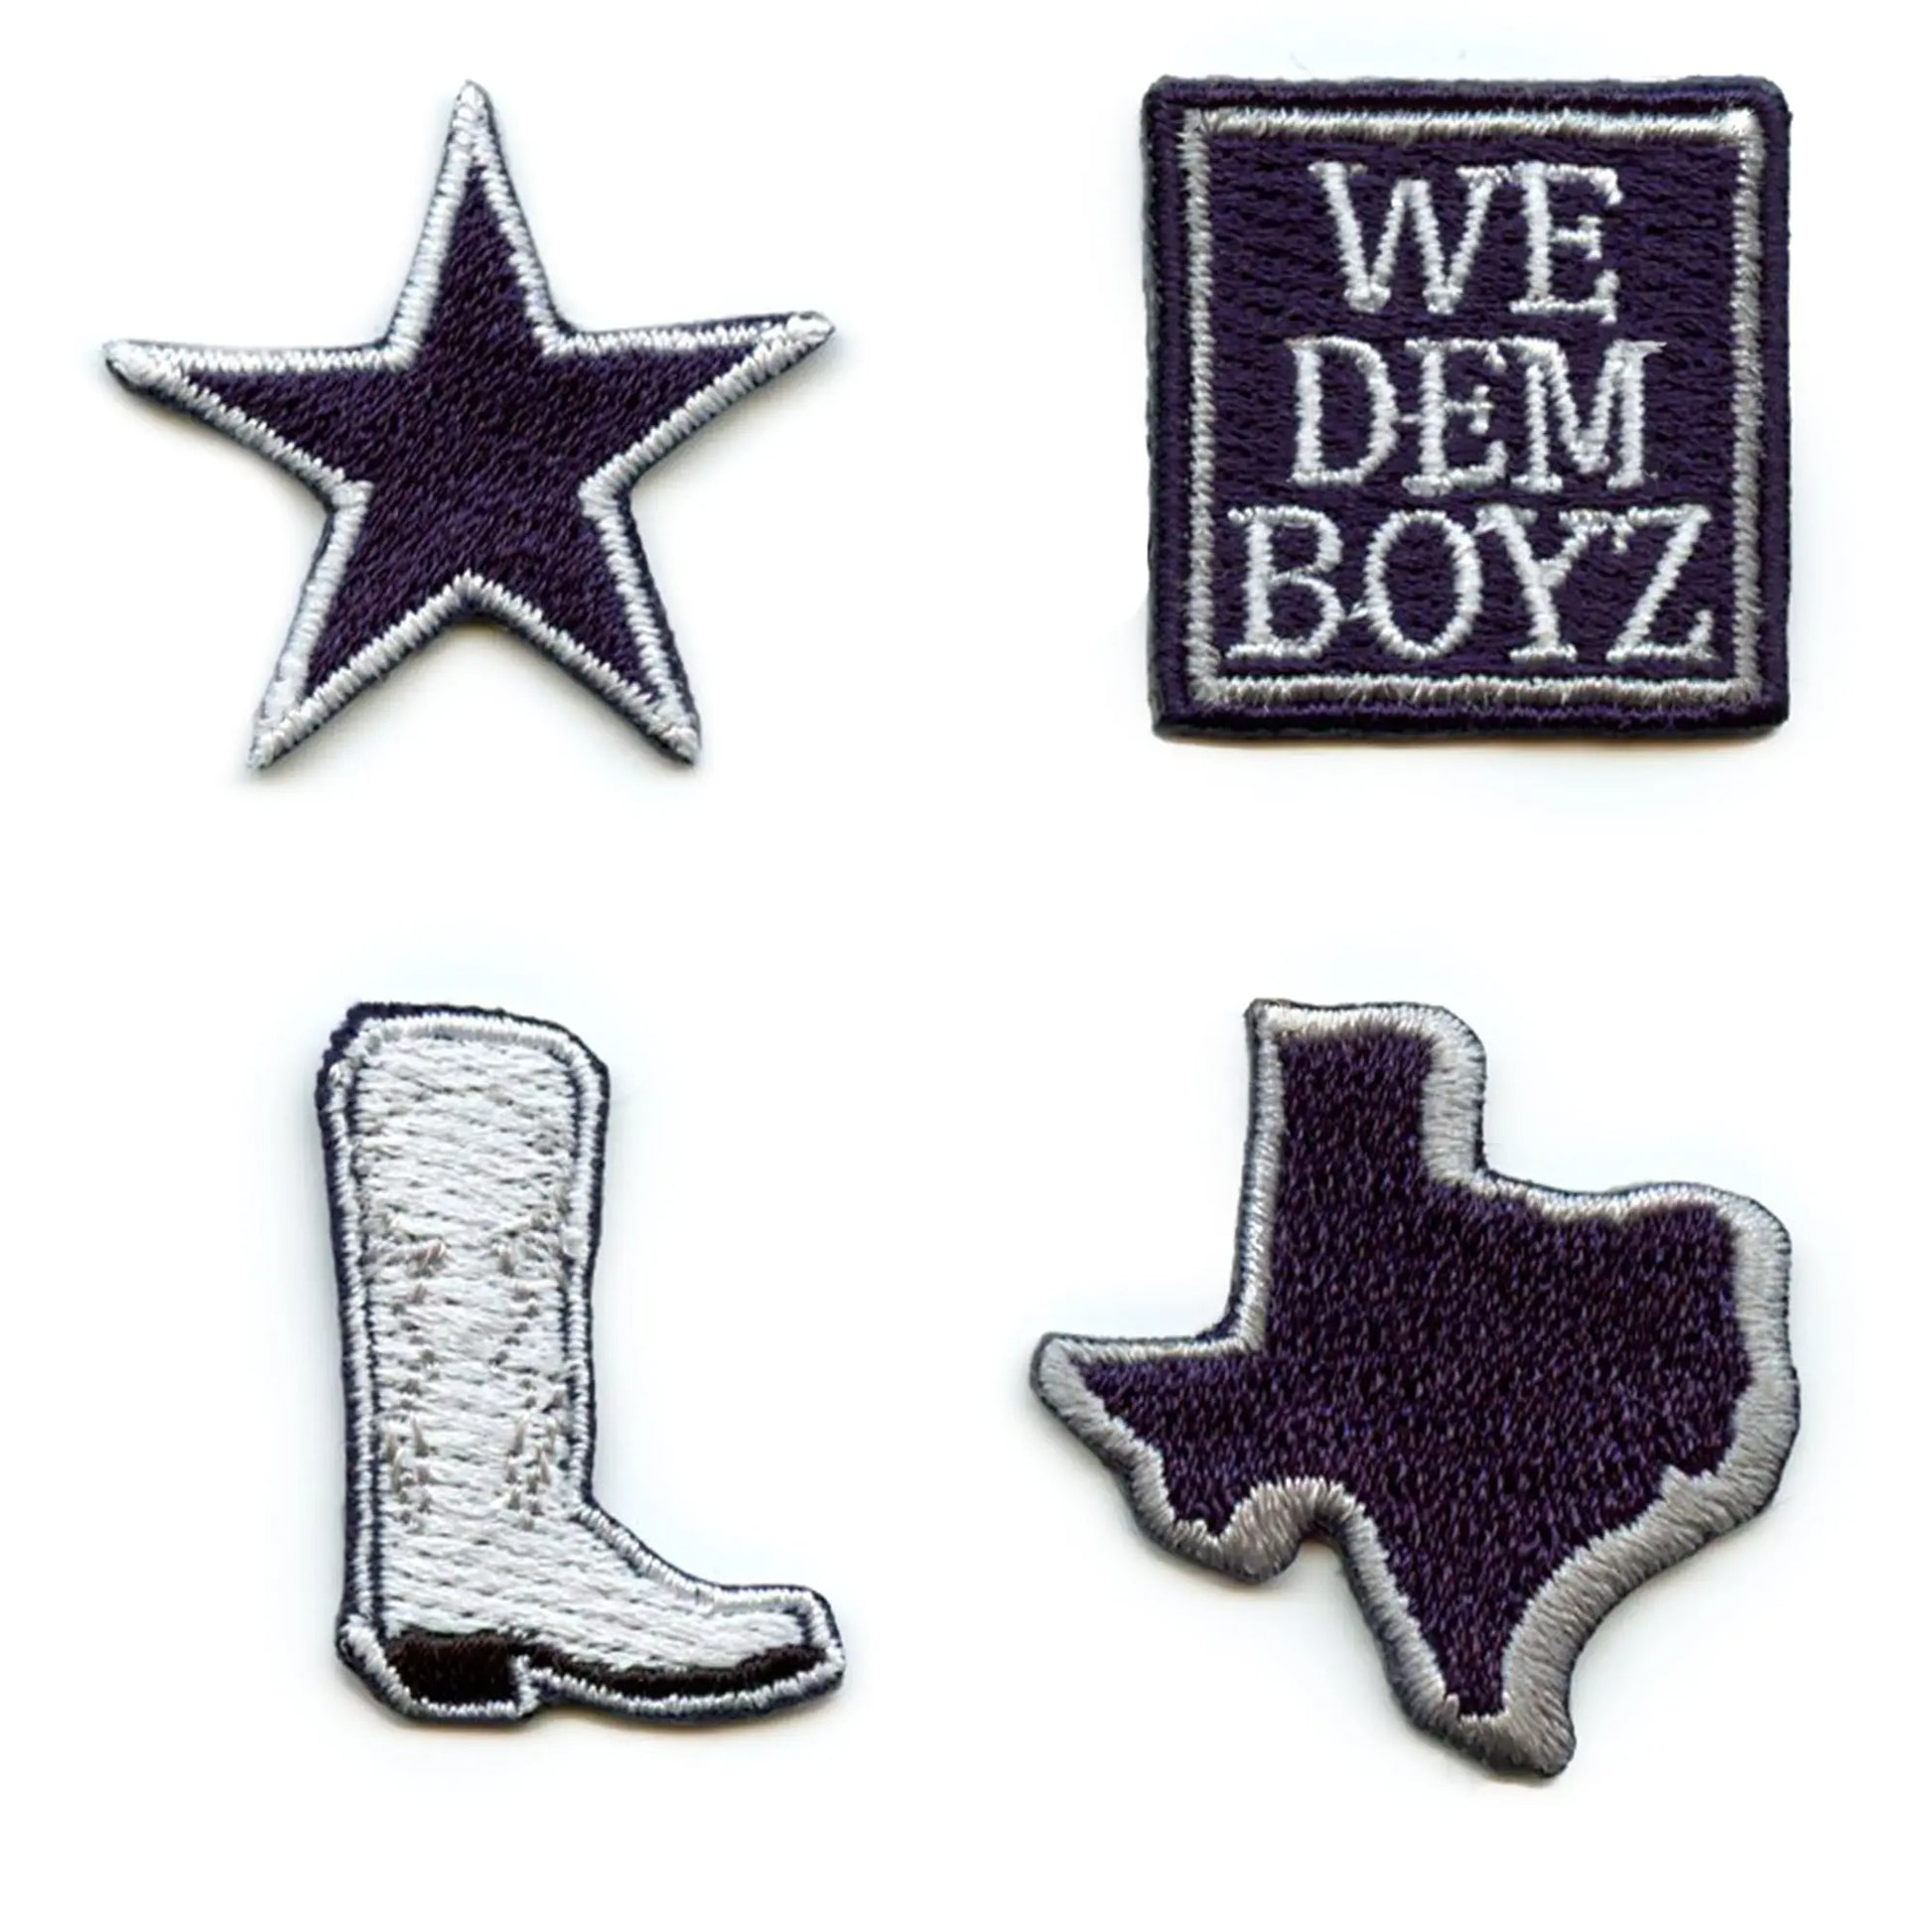 DALLAS COWBOYS EMBROIDERED IRON ON PATCH NFL FOOTBALL